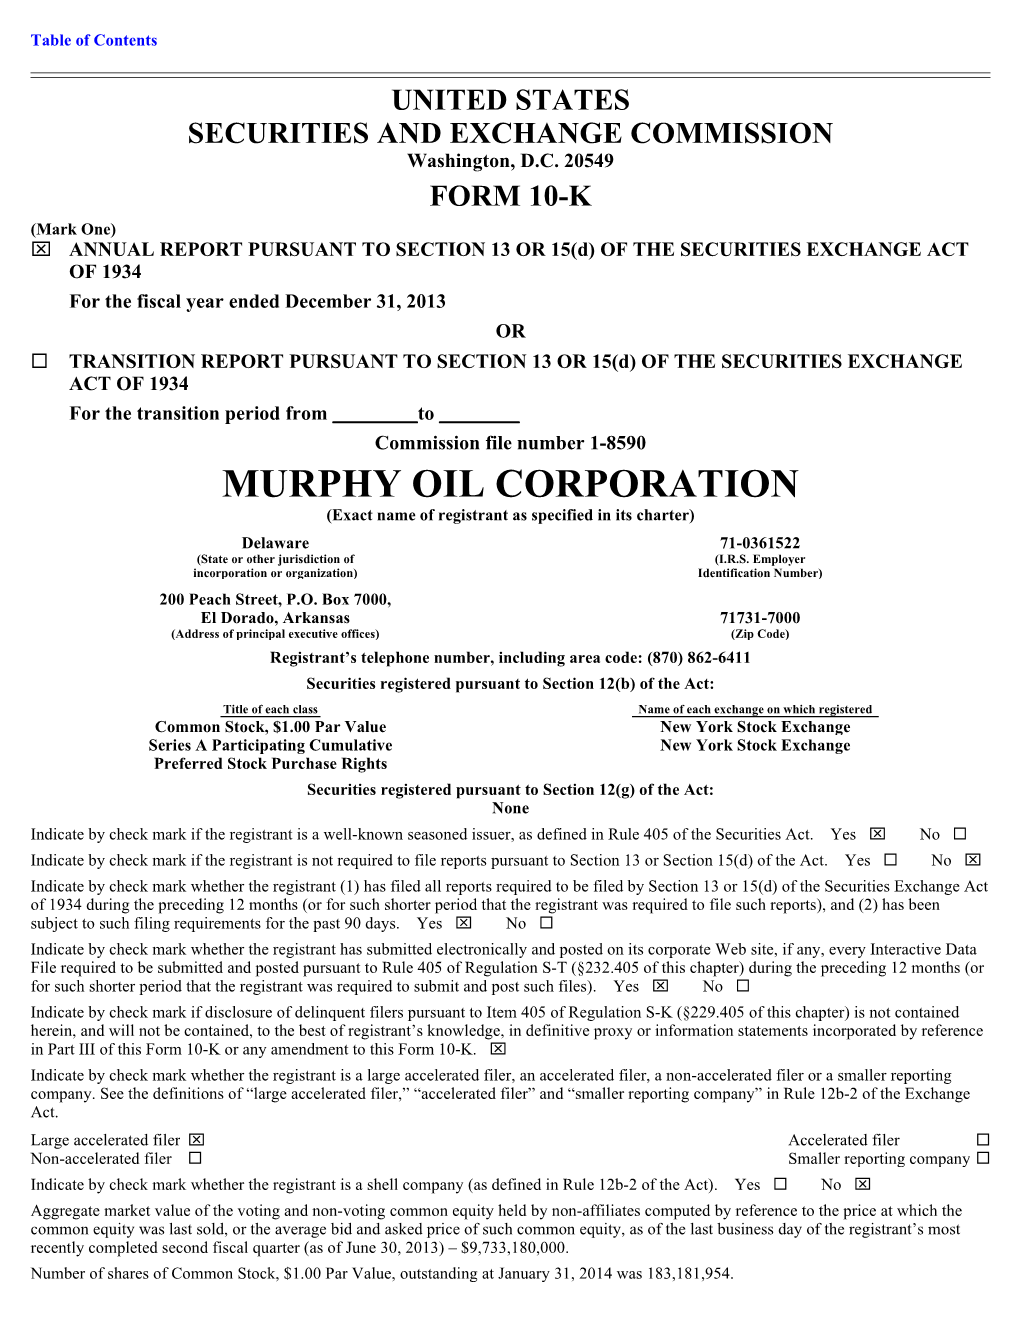 MURPHY OIL CORPORATION (Exact Name of Registrant As Specified in Its Charter)